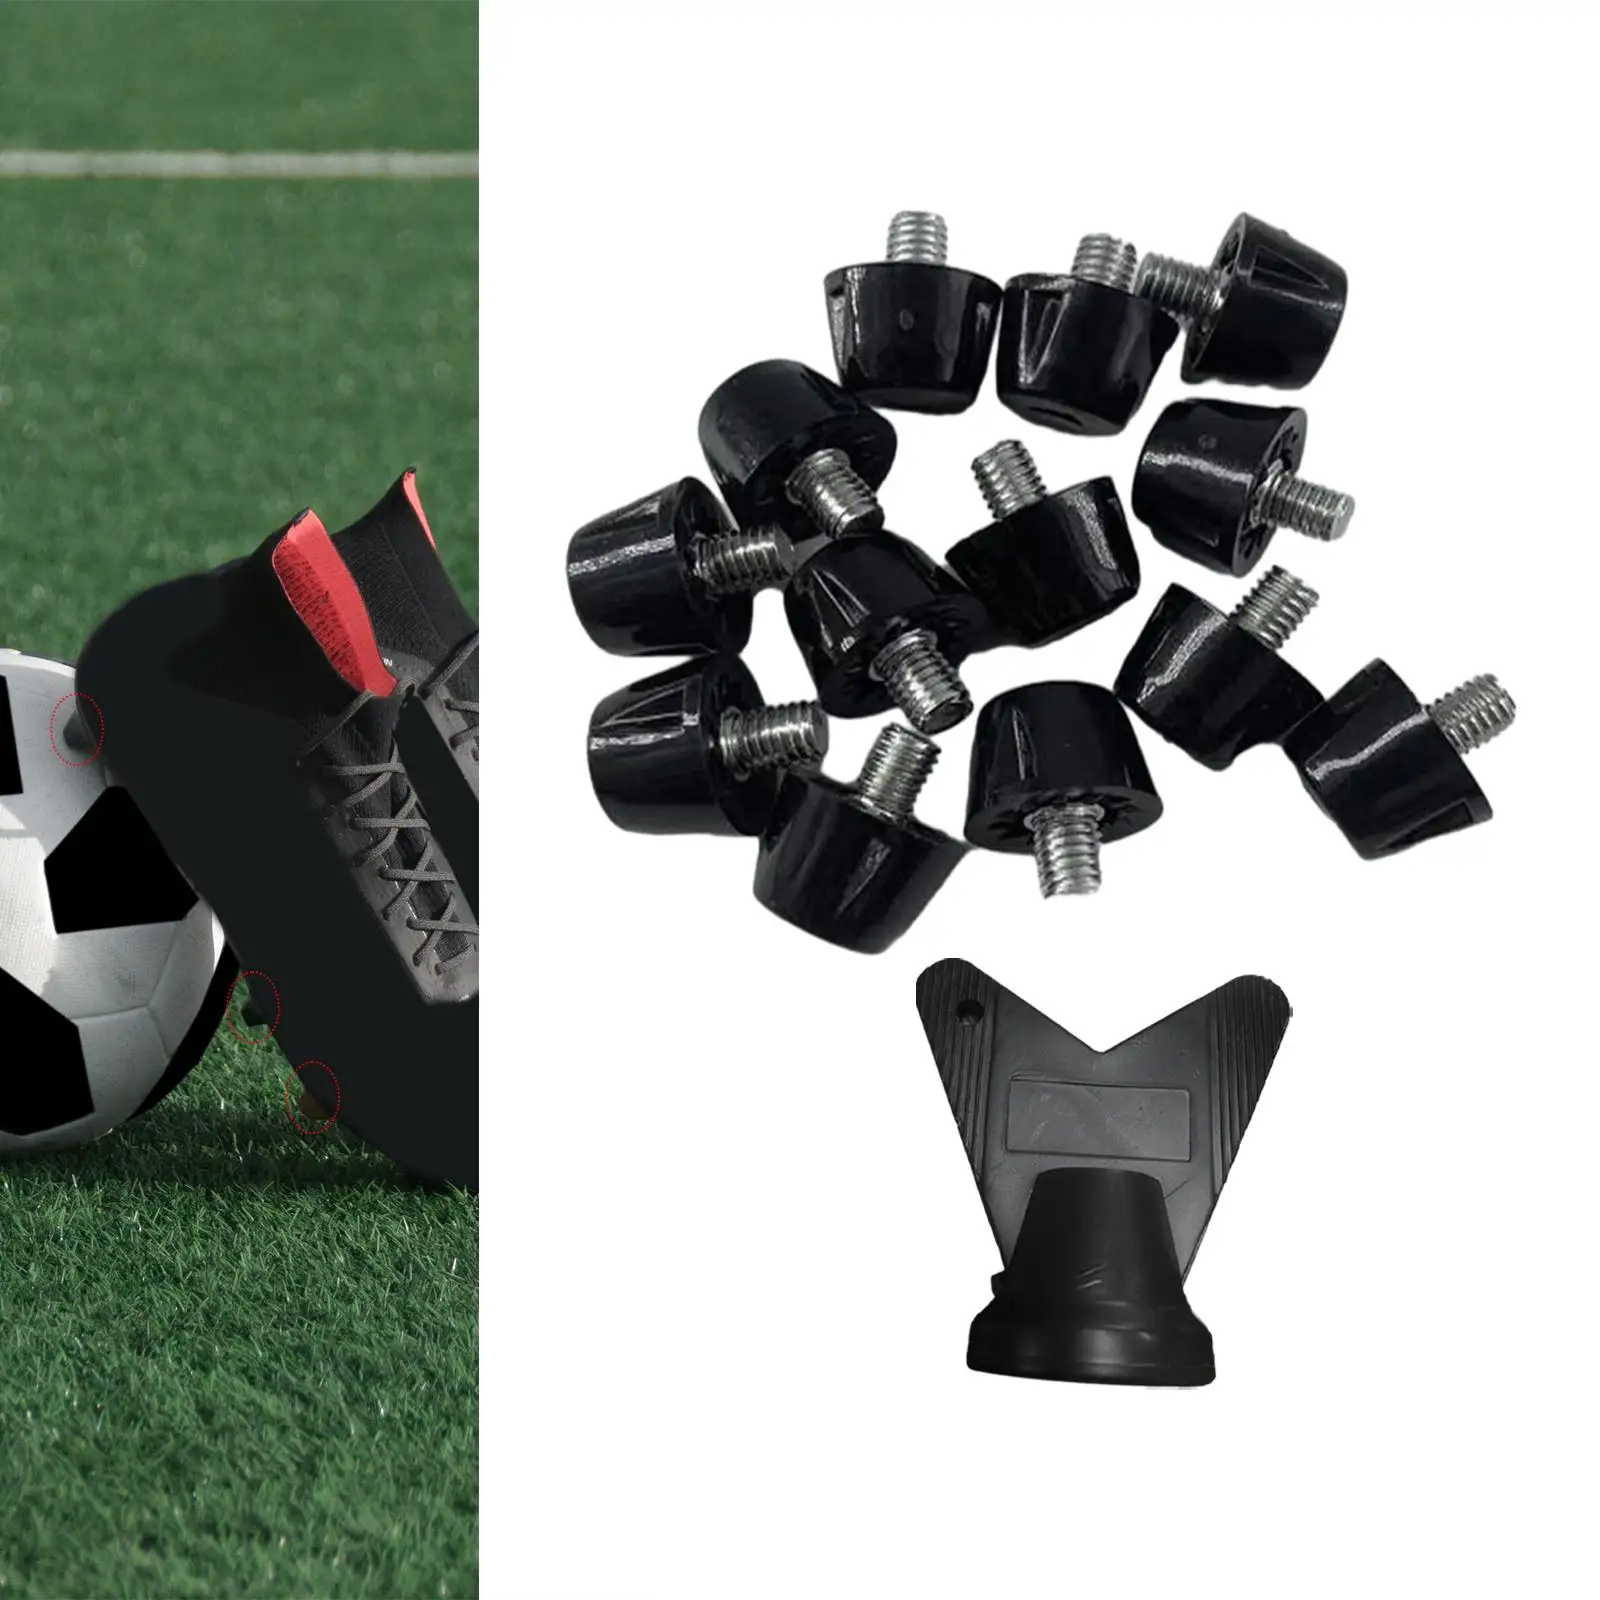 12Pcs Football Boot Studs Universal M5 Screw in Non Slip Rugby Shoes Studs Replacement Football Studs Track Shoe Accessories